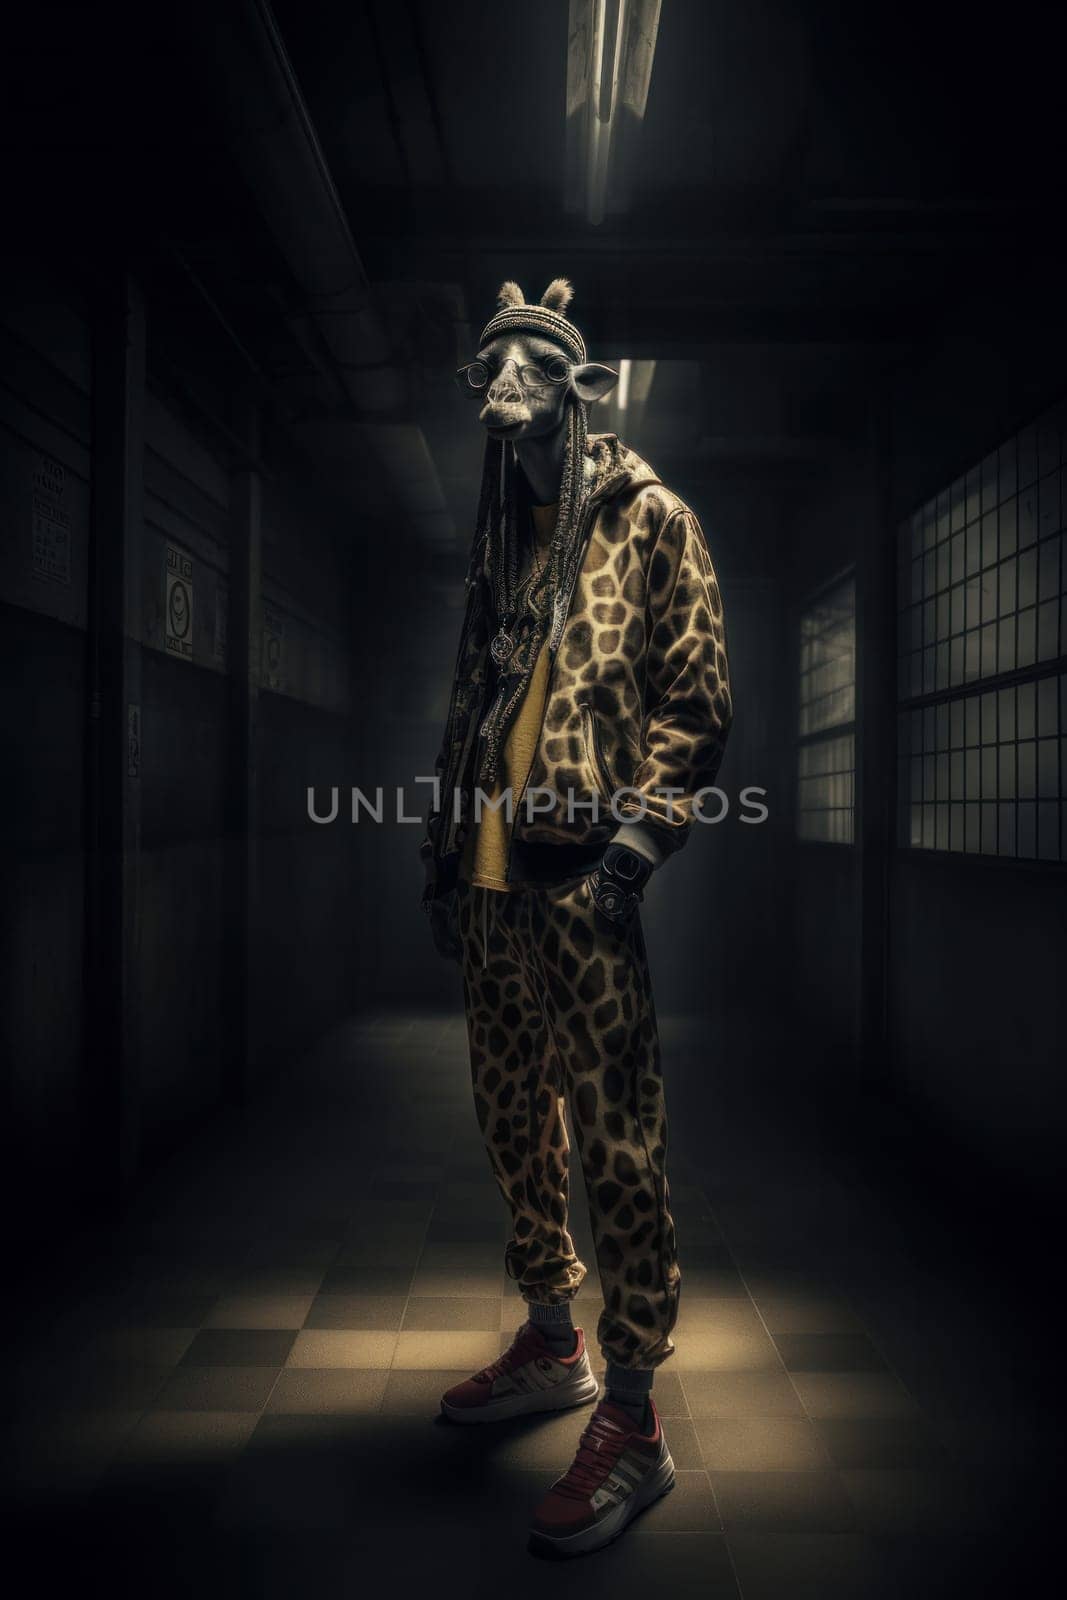 A giraffe stands tall in the dark wearing a stylish outfit of jacket and pants, creating a surreal and bizarre image. This unique scene merges fashion and nature in a humorous way. Is AI Generative.